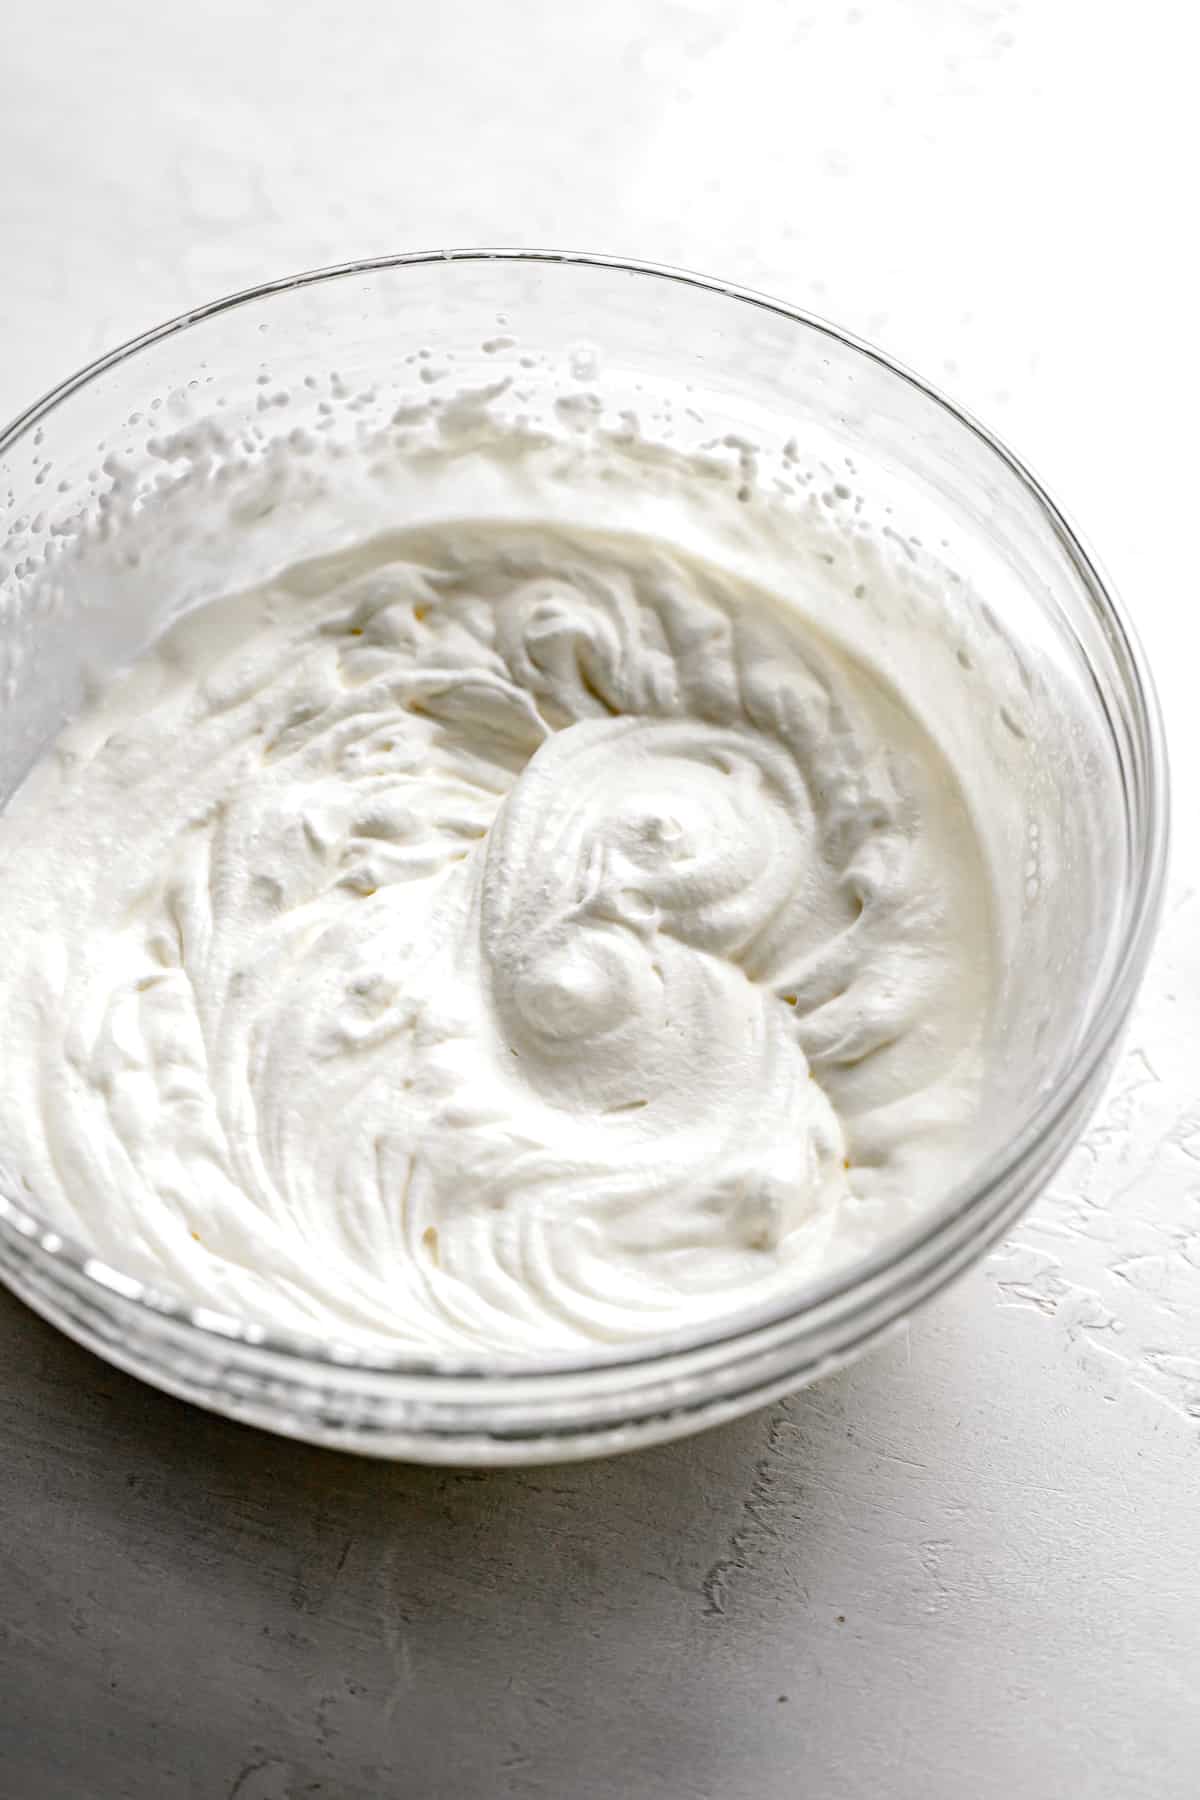 whipped cream in glass bowl.